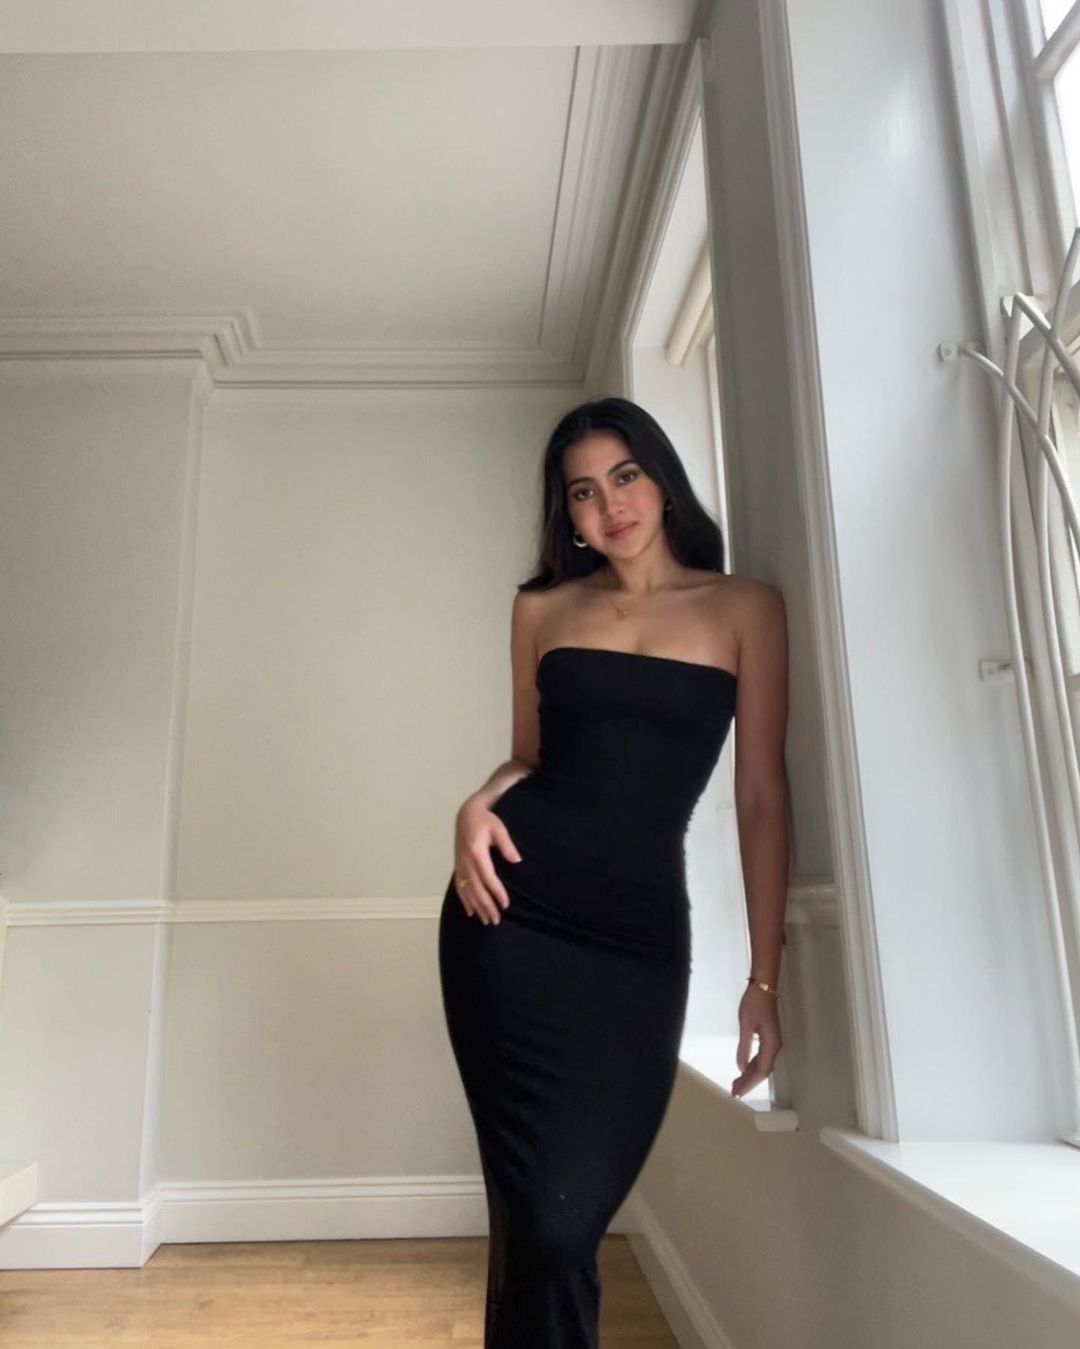 Look: Atasha Muhlach's Chic Black Outfits | Preview.ph